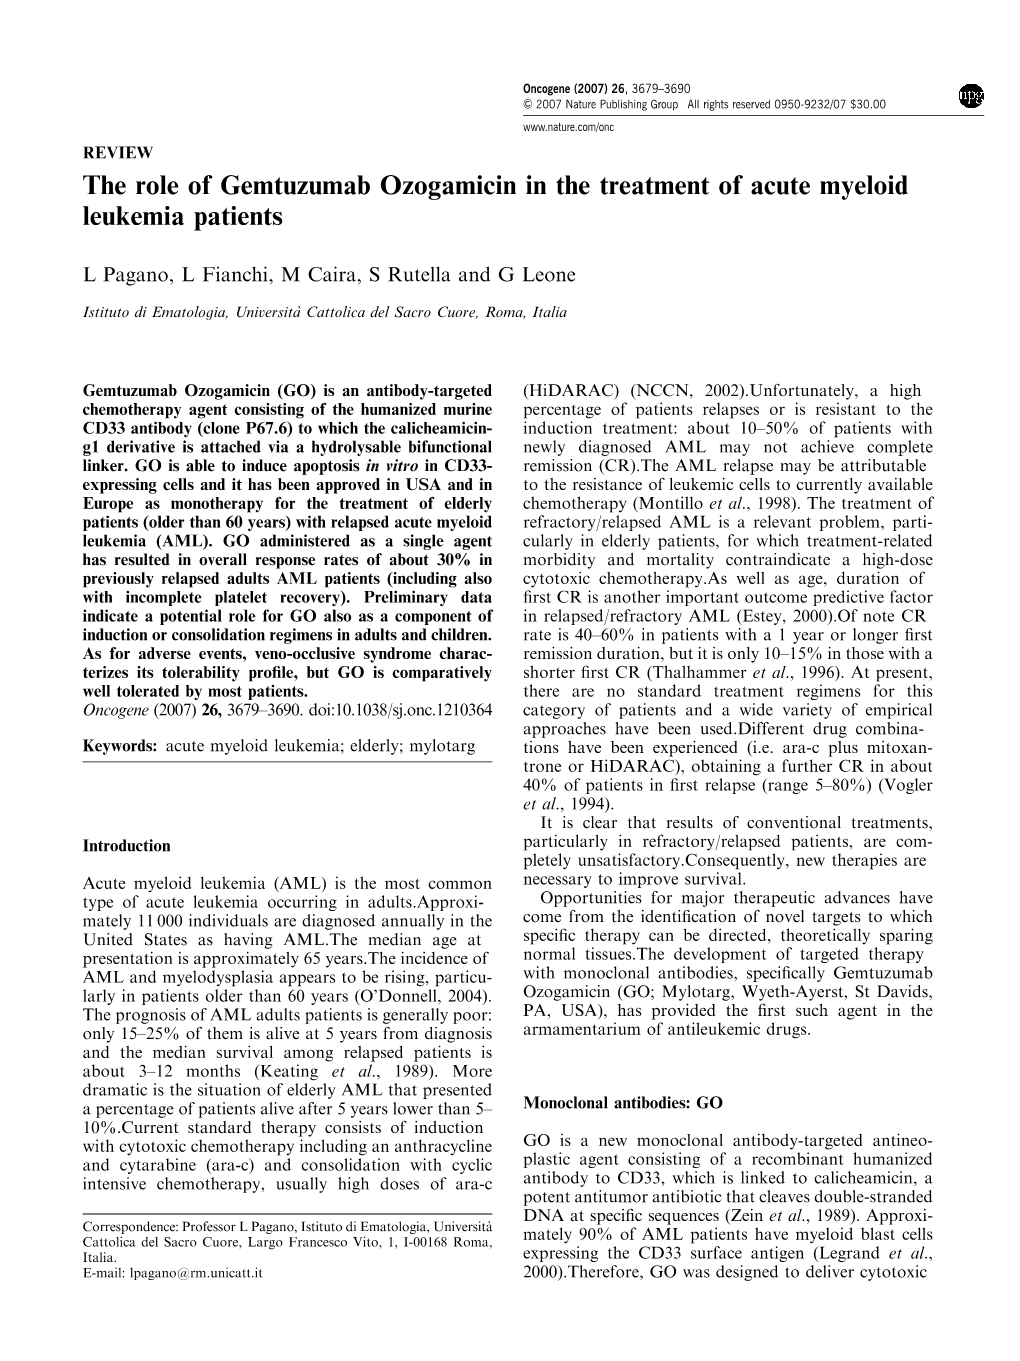 The Role of Gemtuzumab Ozogamicin in the Treatment of Acute Myeloid Leukemia Patients